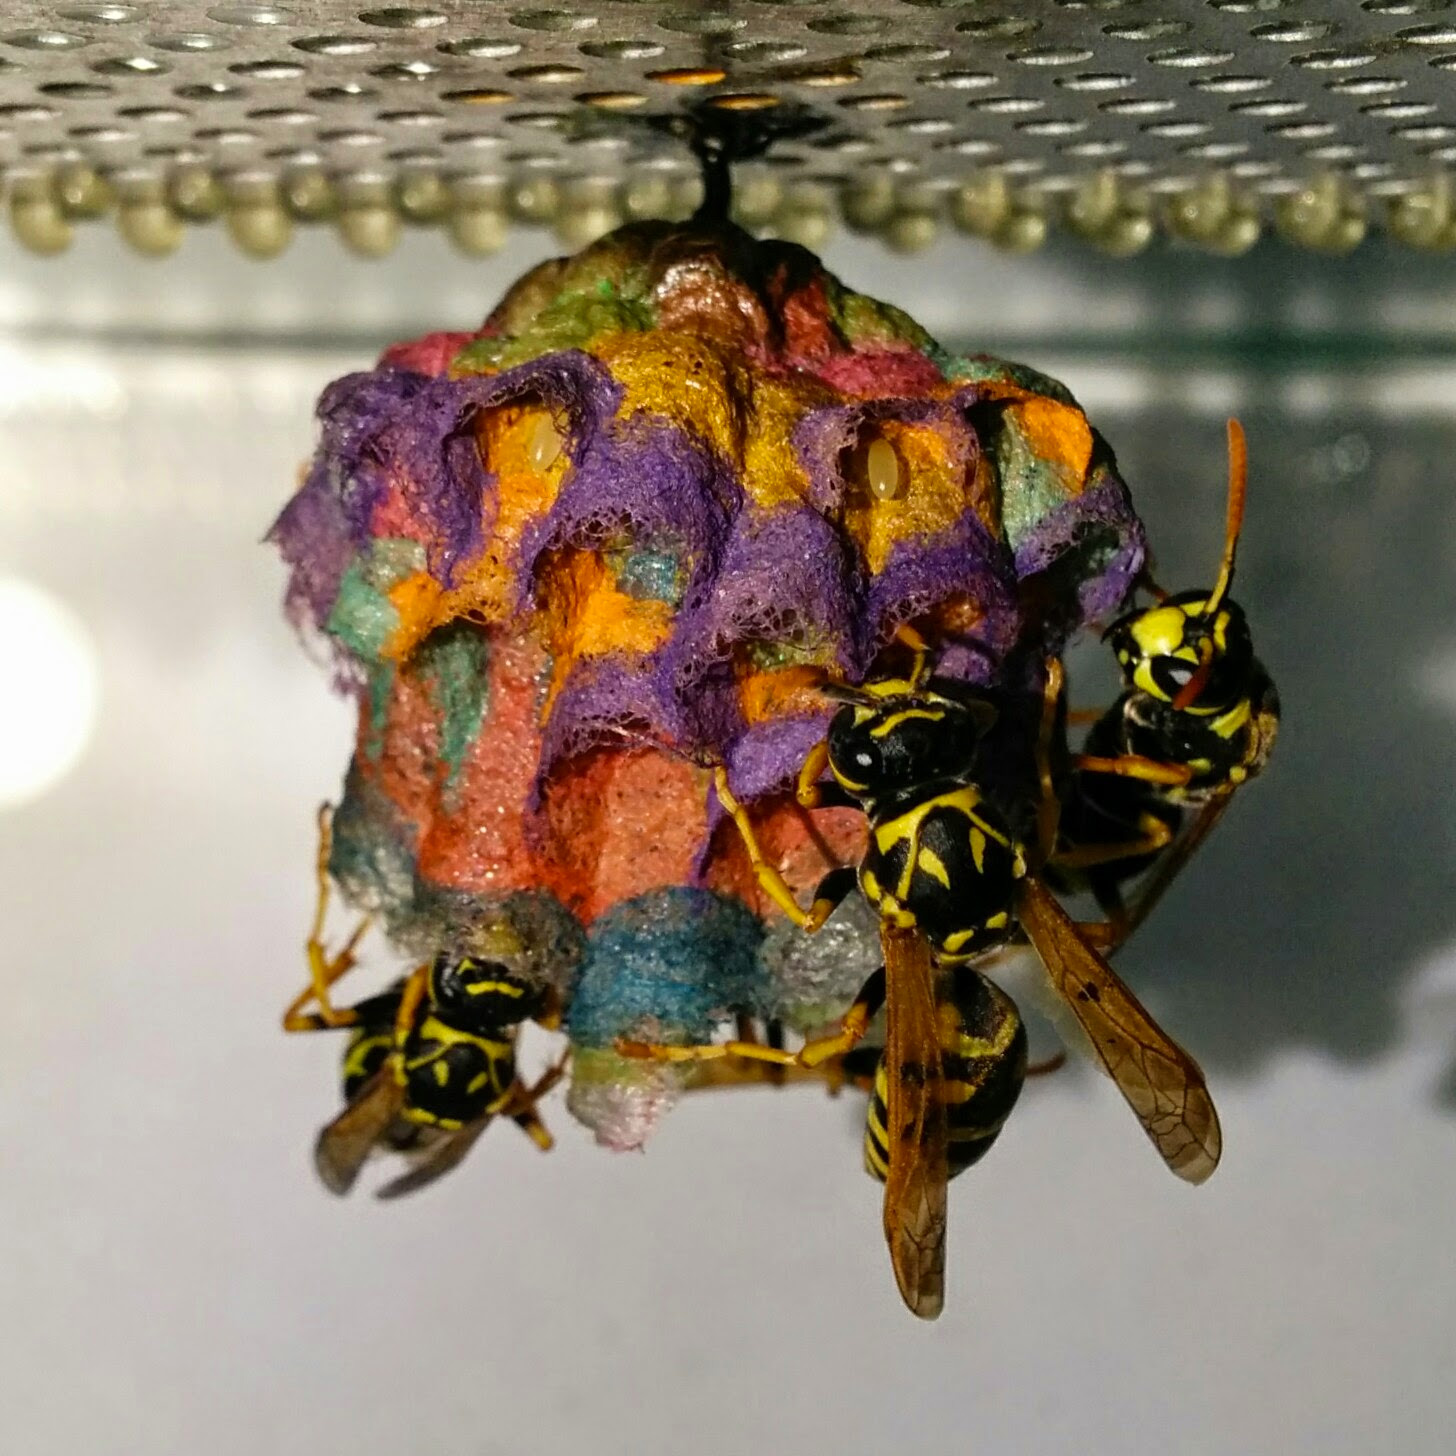 Wasp Colony Built A Rainbow Nest Out Of Colored Construction Papers